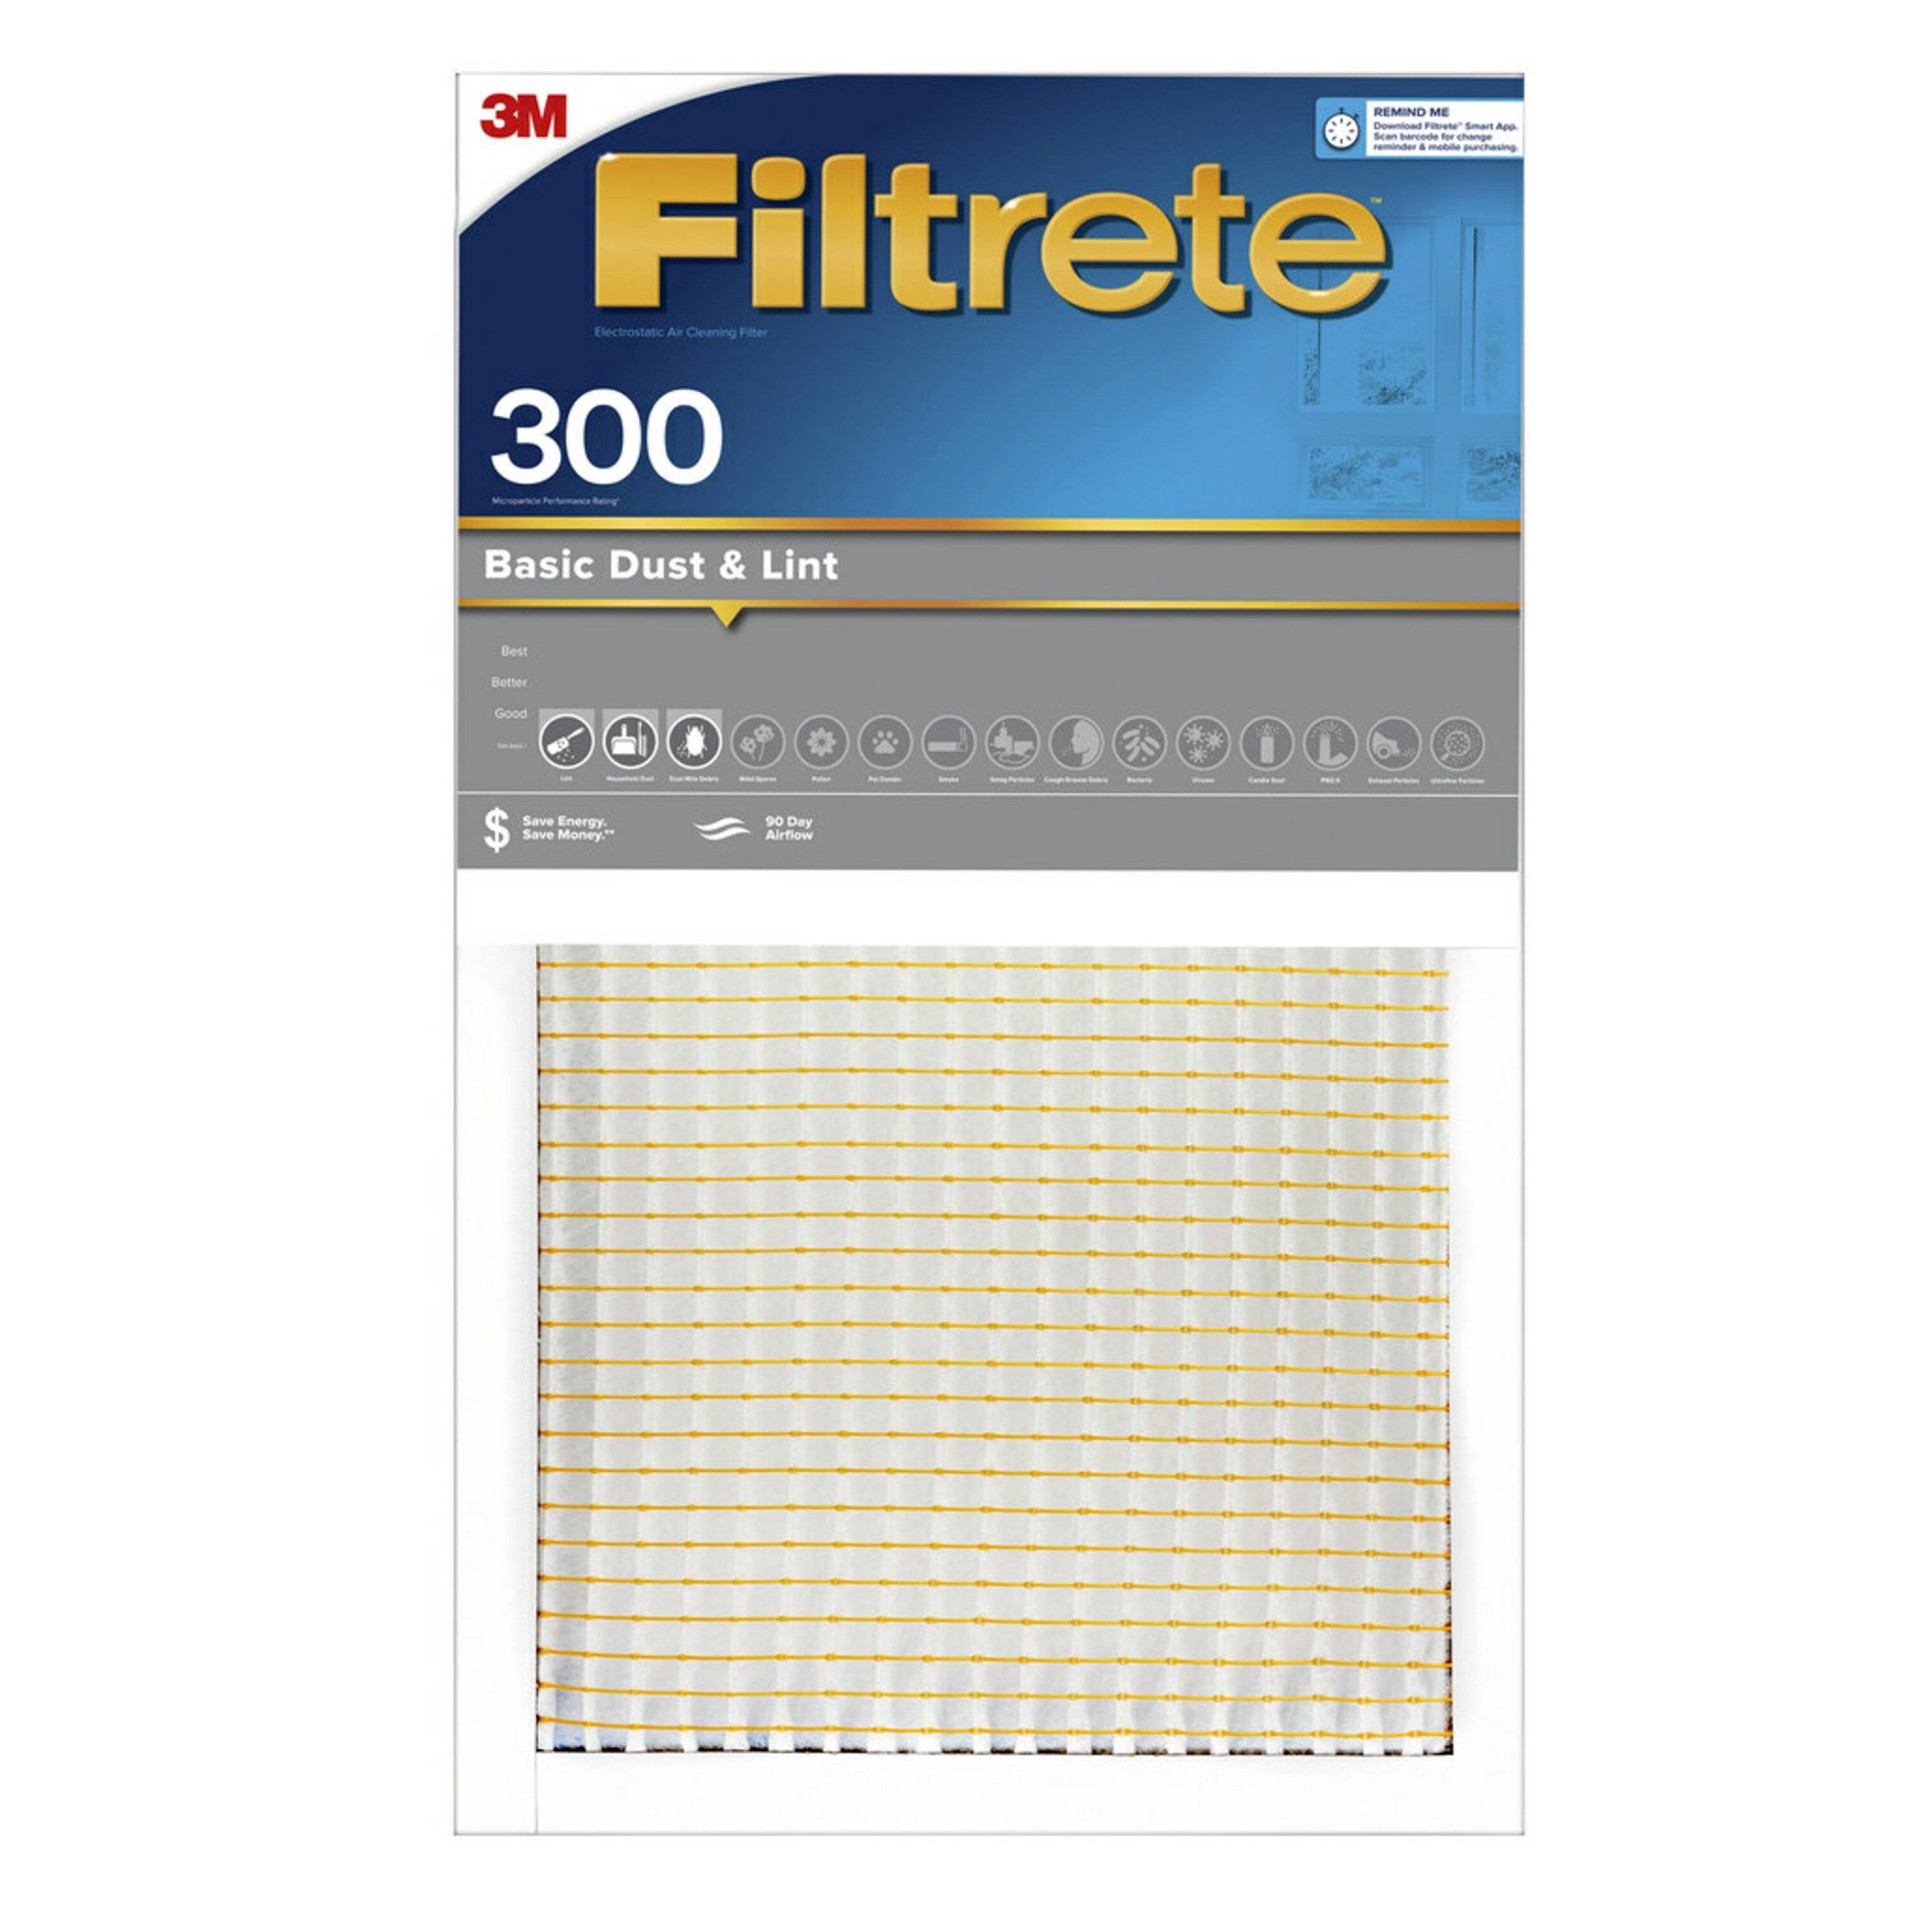 slide 1 of 4, 3M Filtrete Dust Reduction 300 High Air Flow Filter, 20 in x 25 in